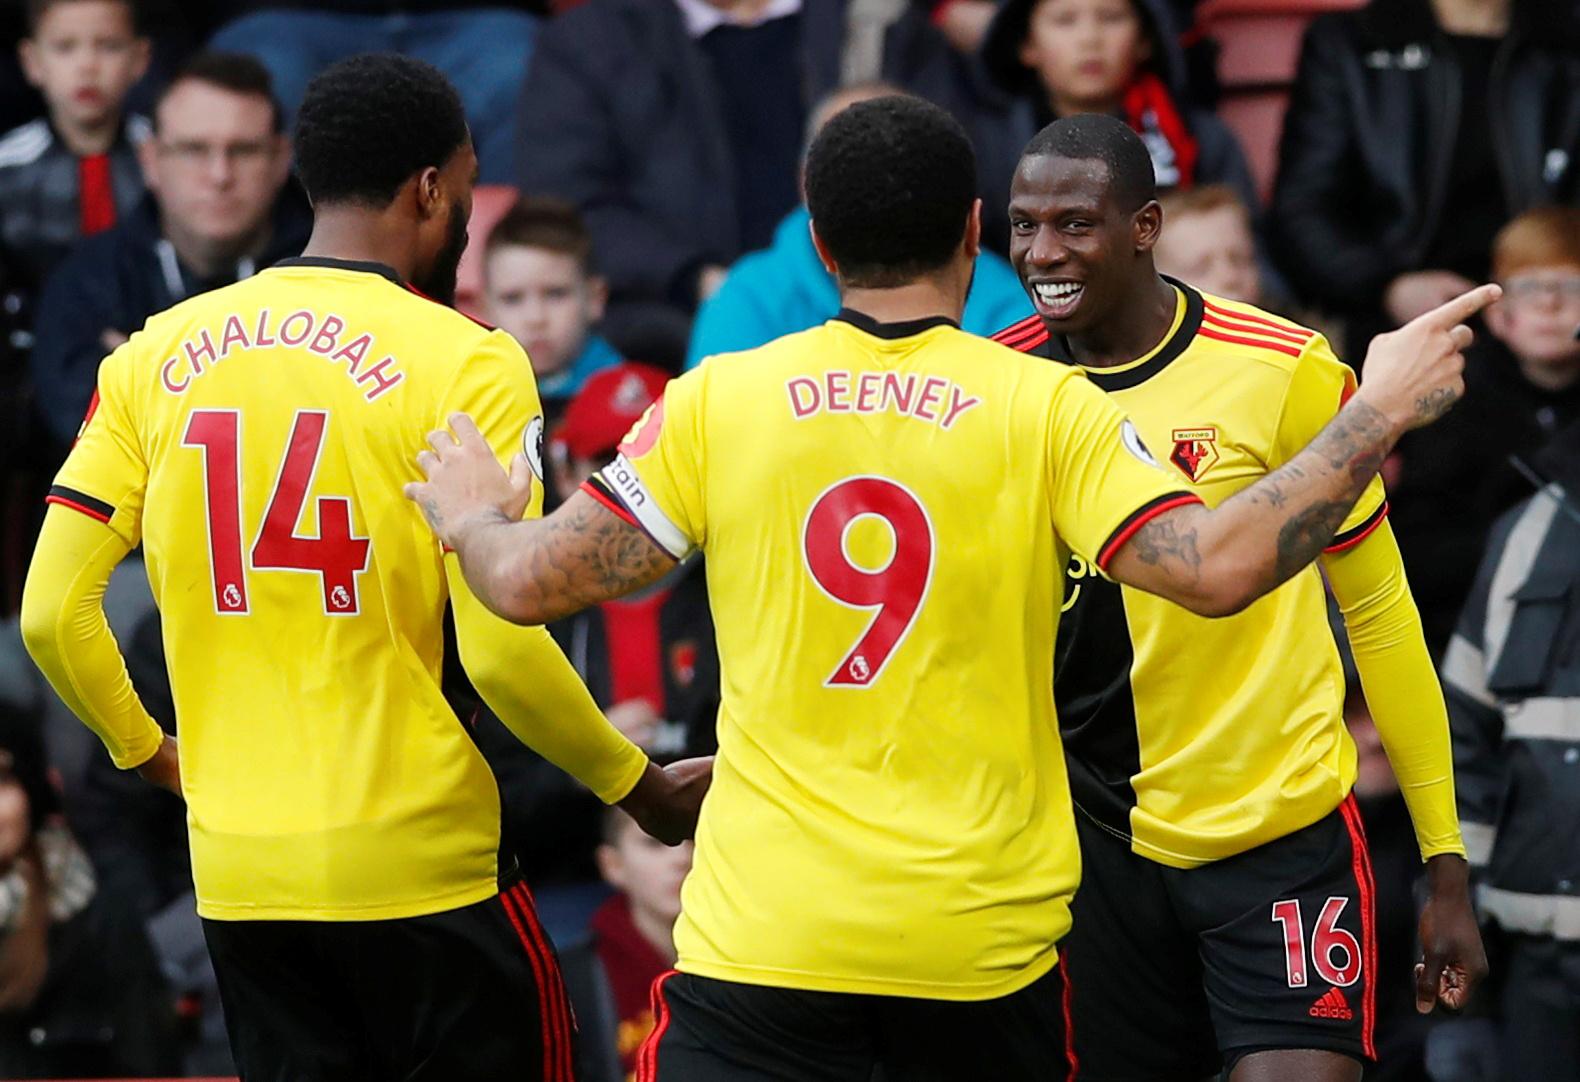 Premier League on Twitter: "FULL-TIME AFC Bournemouth 0-3 Watford Goals from Abdoulaye Doucoure, Troy Deeney and Roberto Pereyra seal a comprehensive win for Watford, move out of the relegation zone #BOUWAT